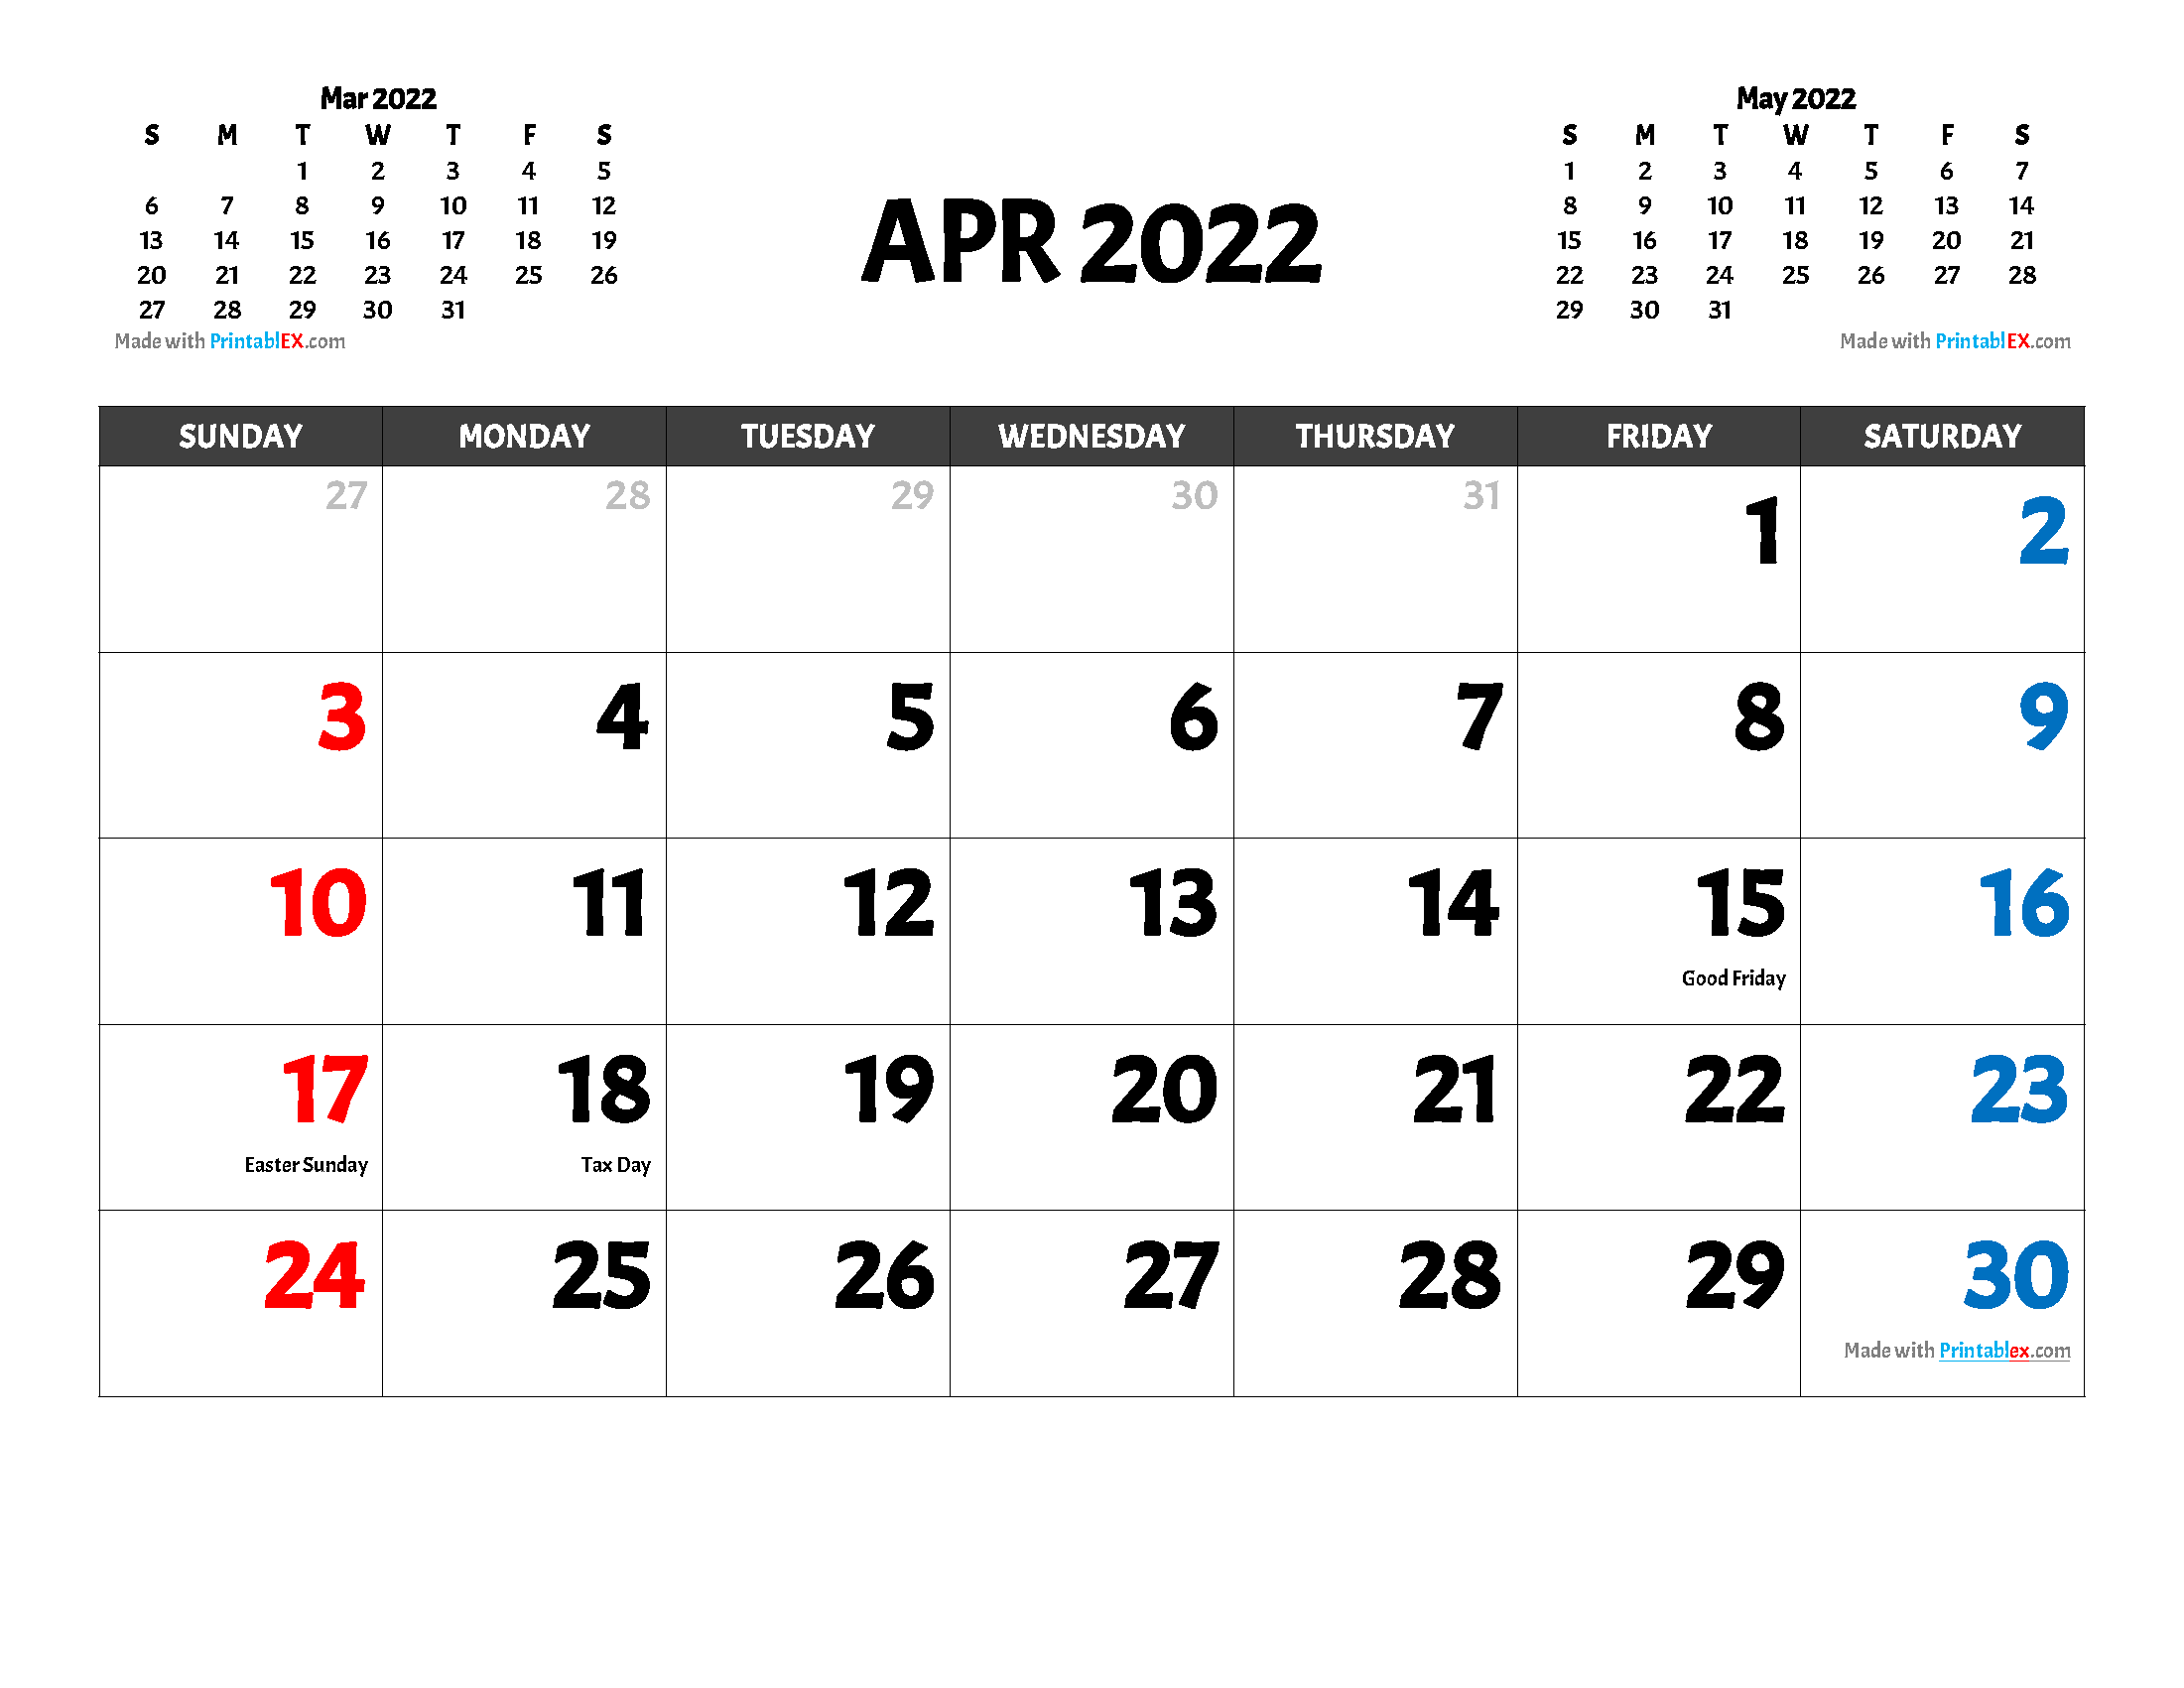 Free Printable April 2022 Calendar with holidays and observances in United States